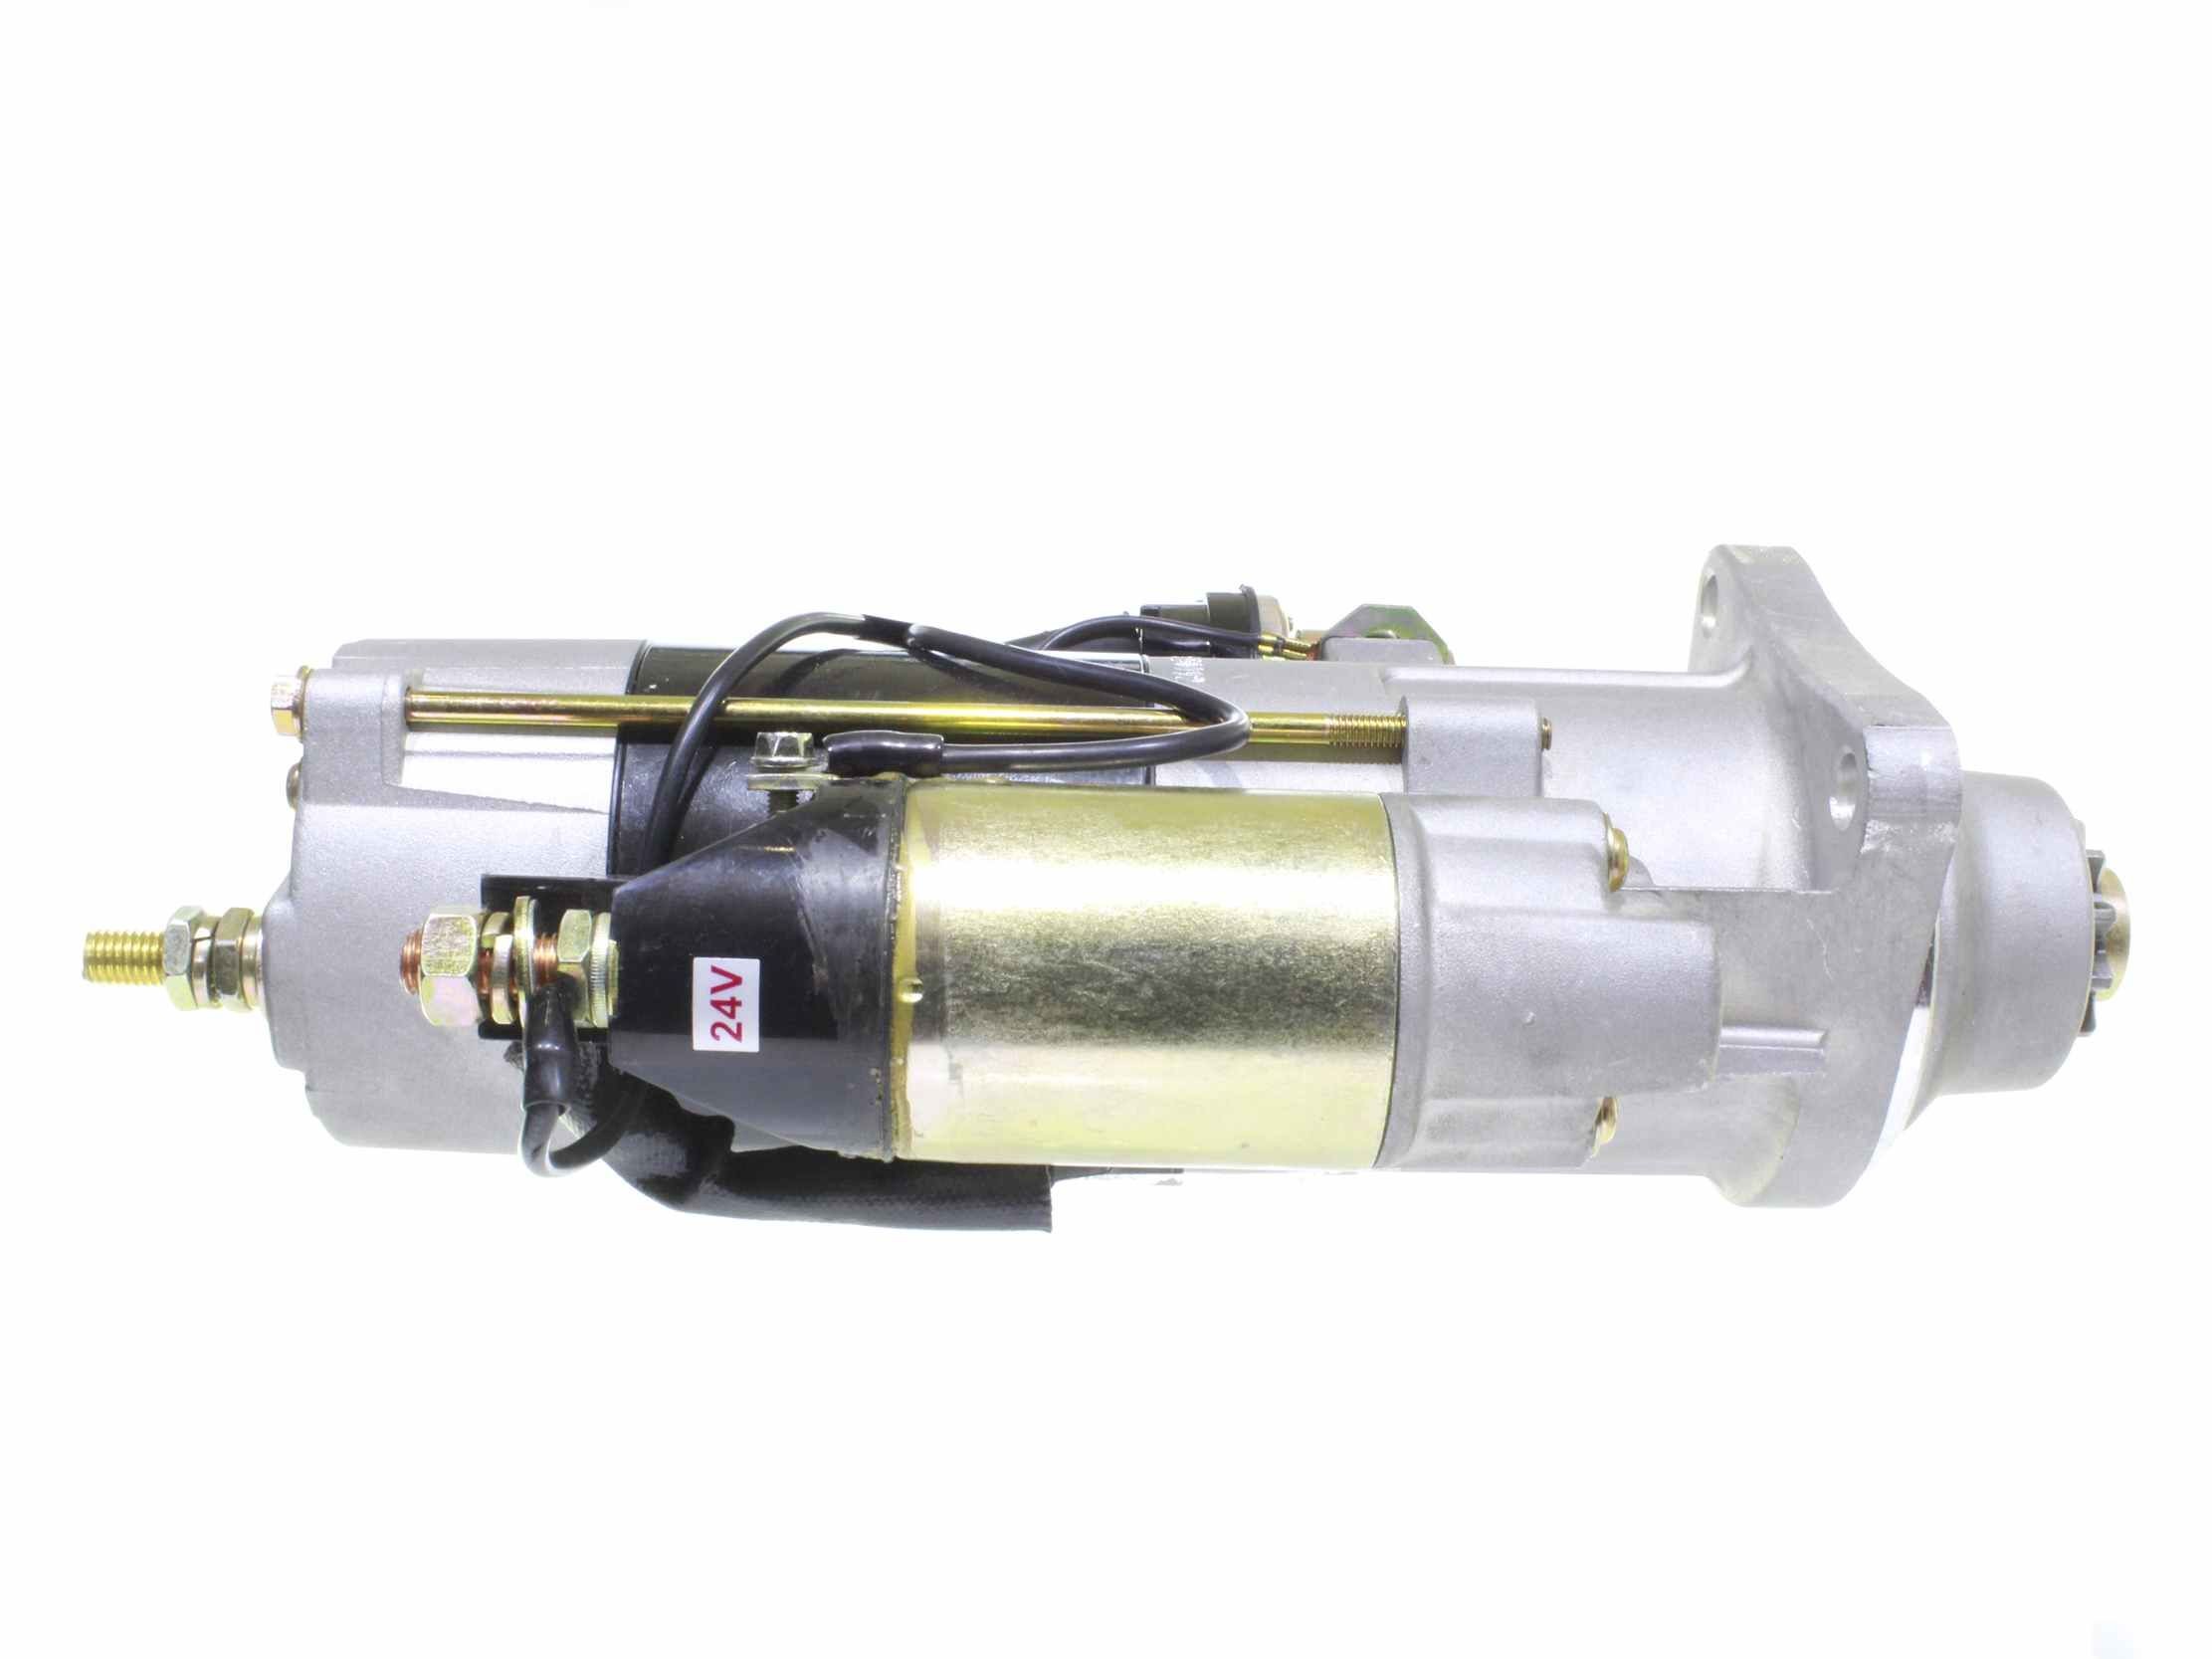 10439862 Starter motor 10439862 ALANKO 24V, 5,5kW, Number of Teeth: 11, B+(M10), 50(M5), Ø 89 mm, with integrated relay